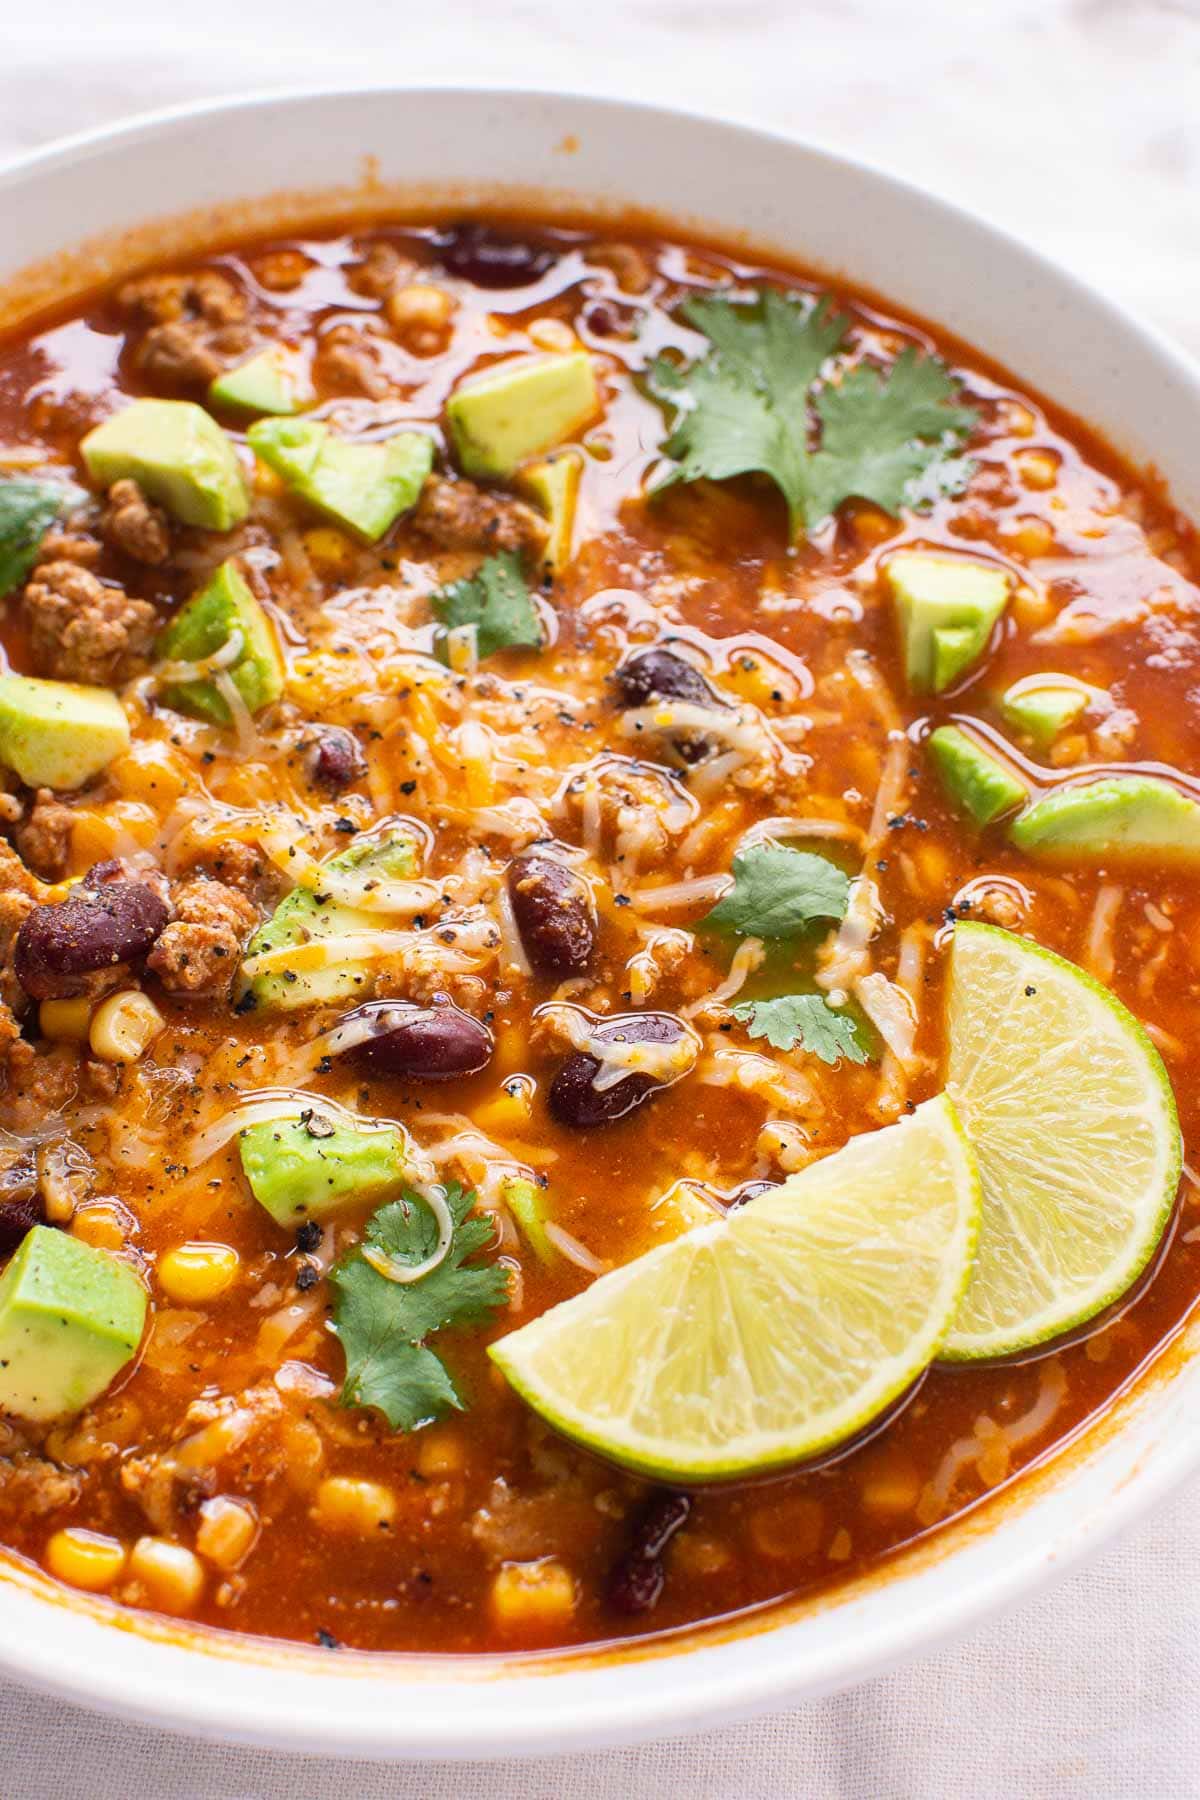 Turkey taco soup garnished with avocado, cheese, cilantro and lime served in a bowl.